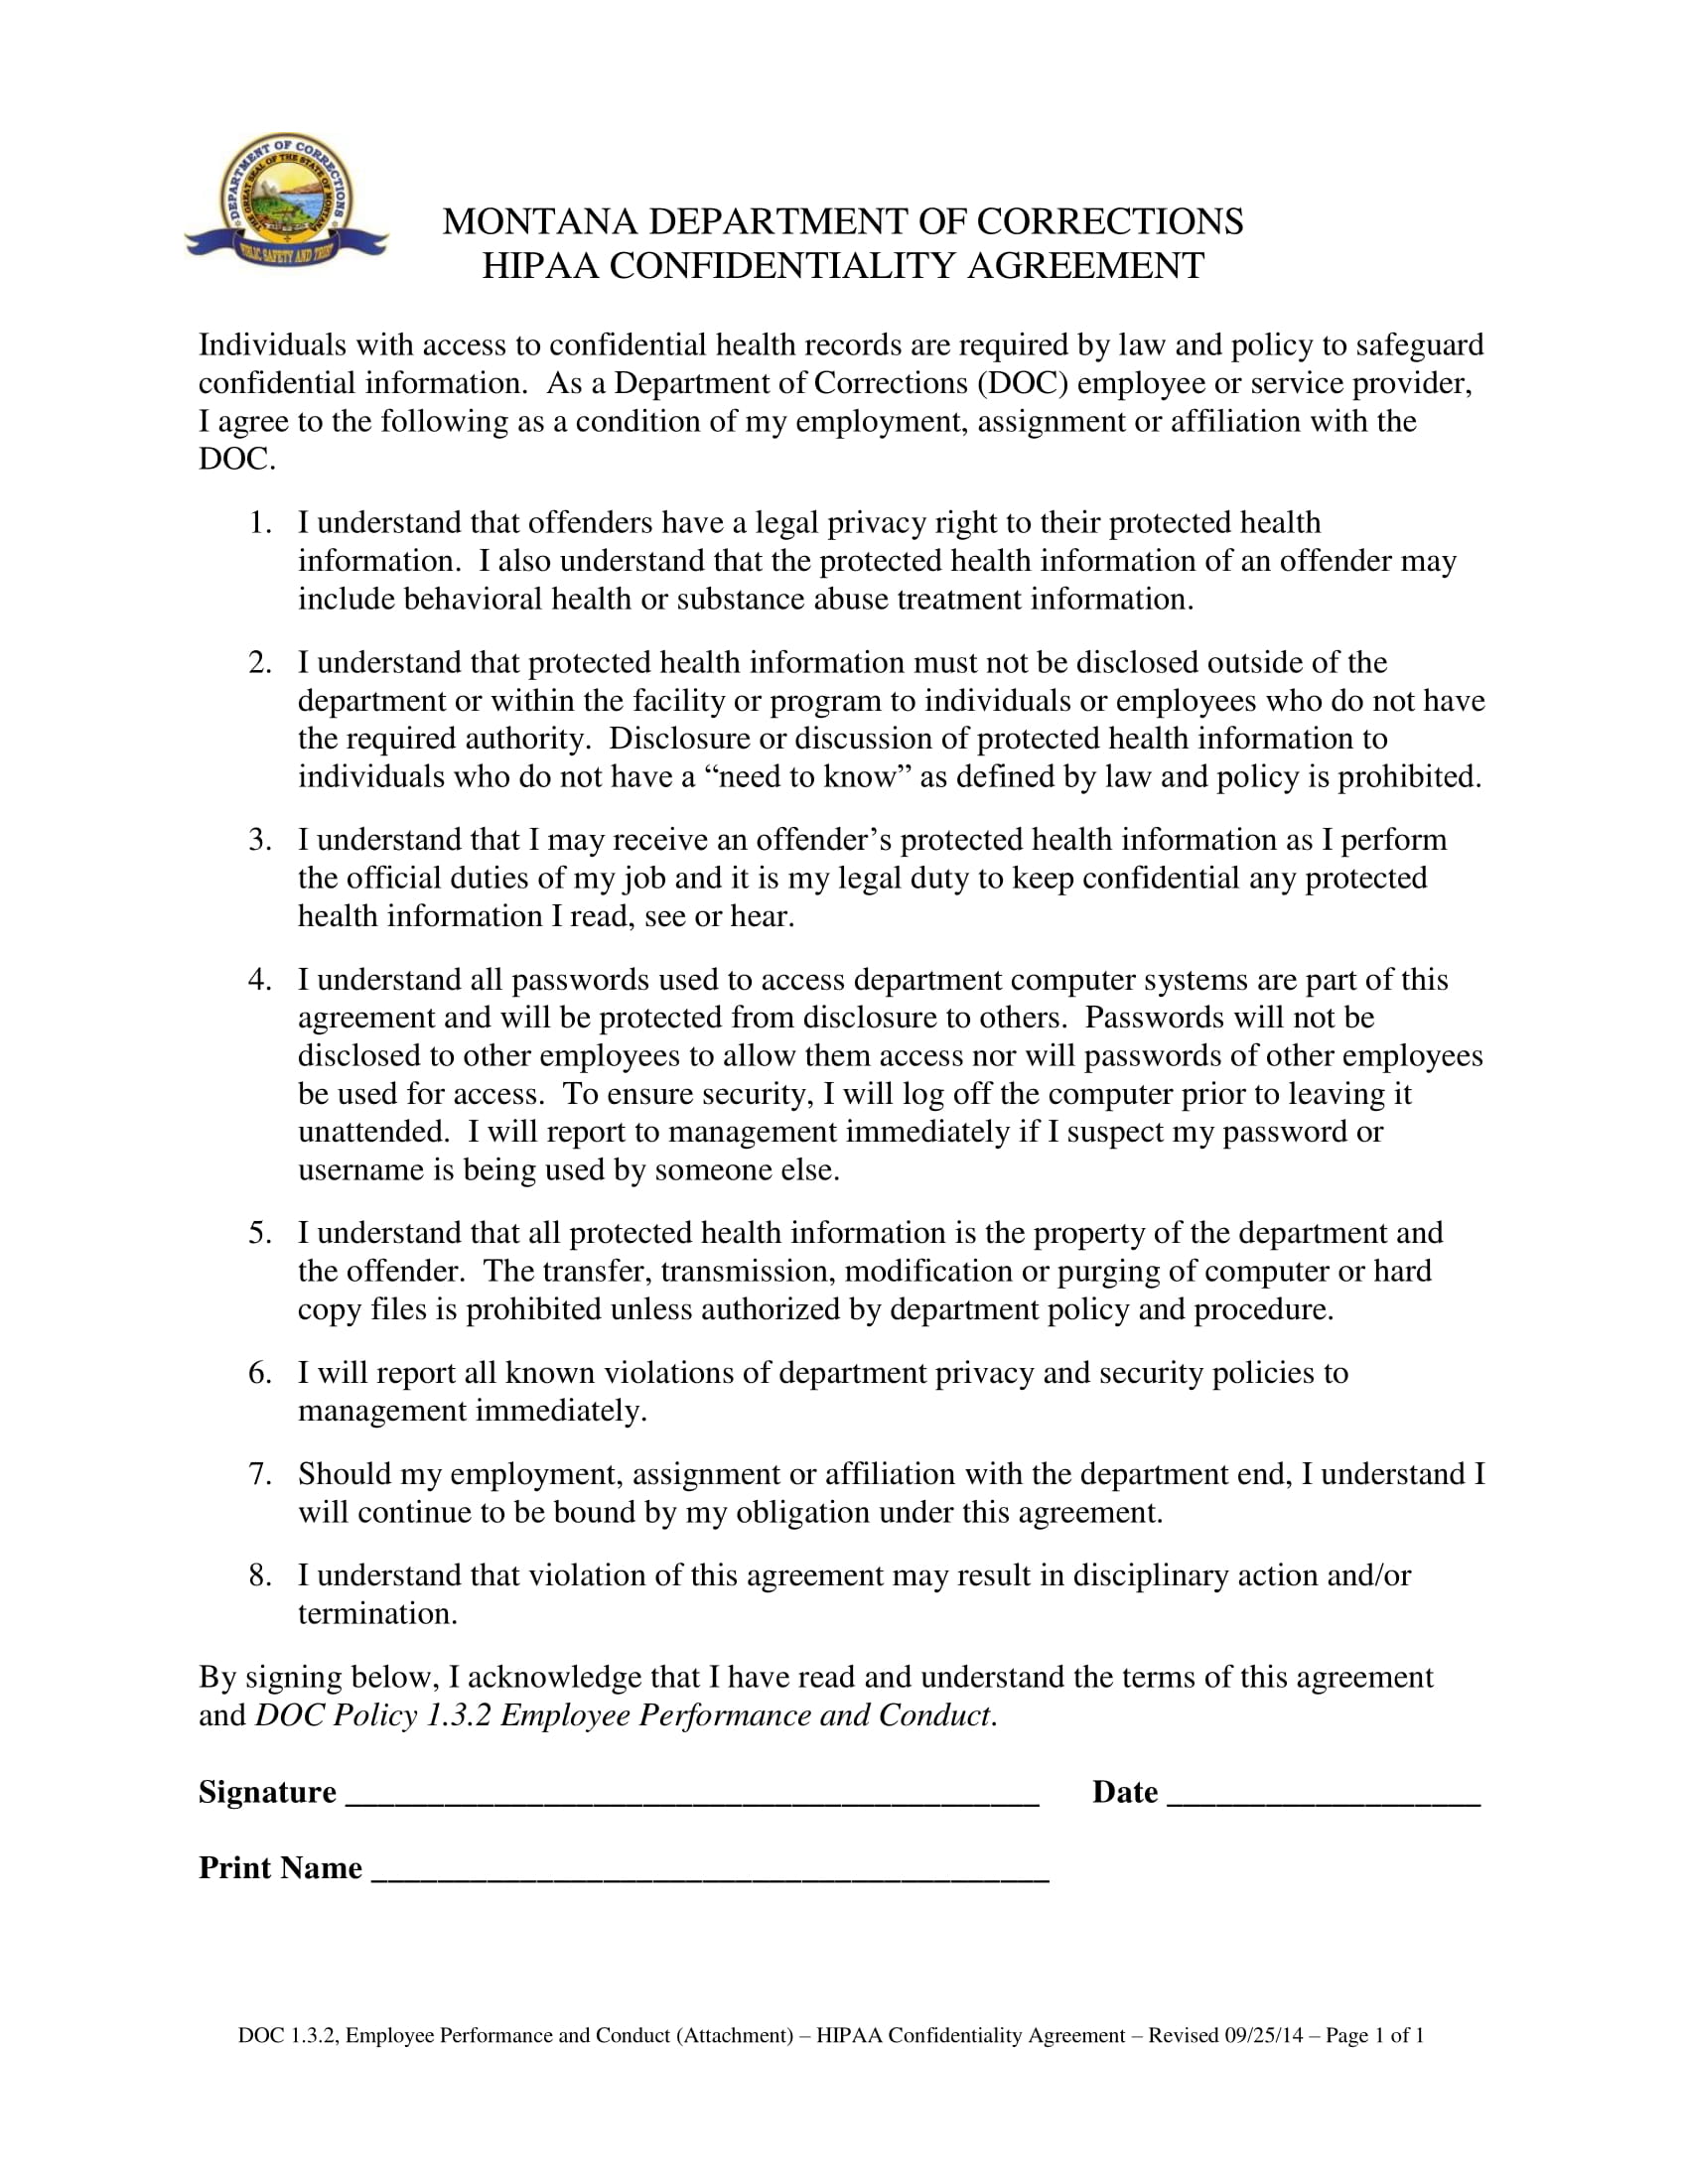 detailed hipaa confidentiality agreement example 1